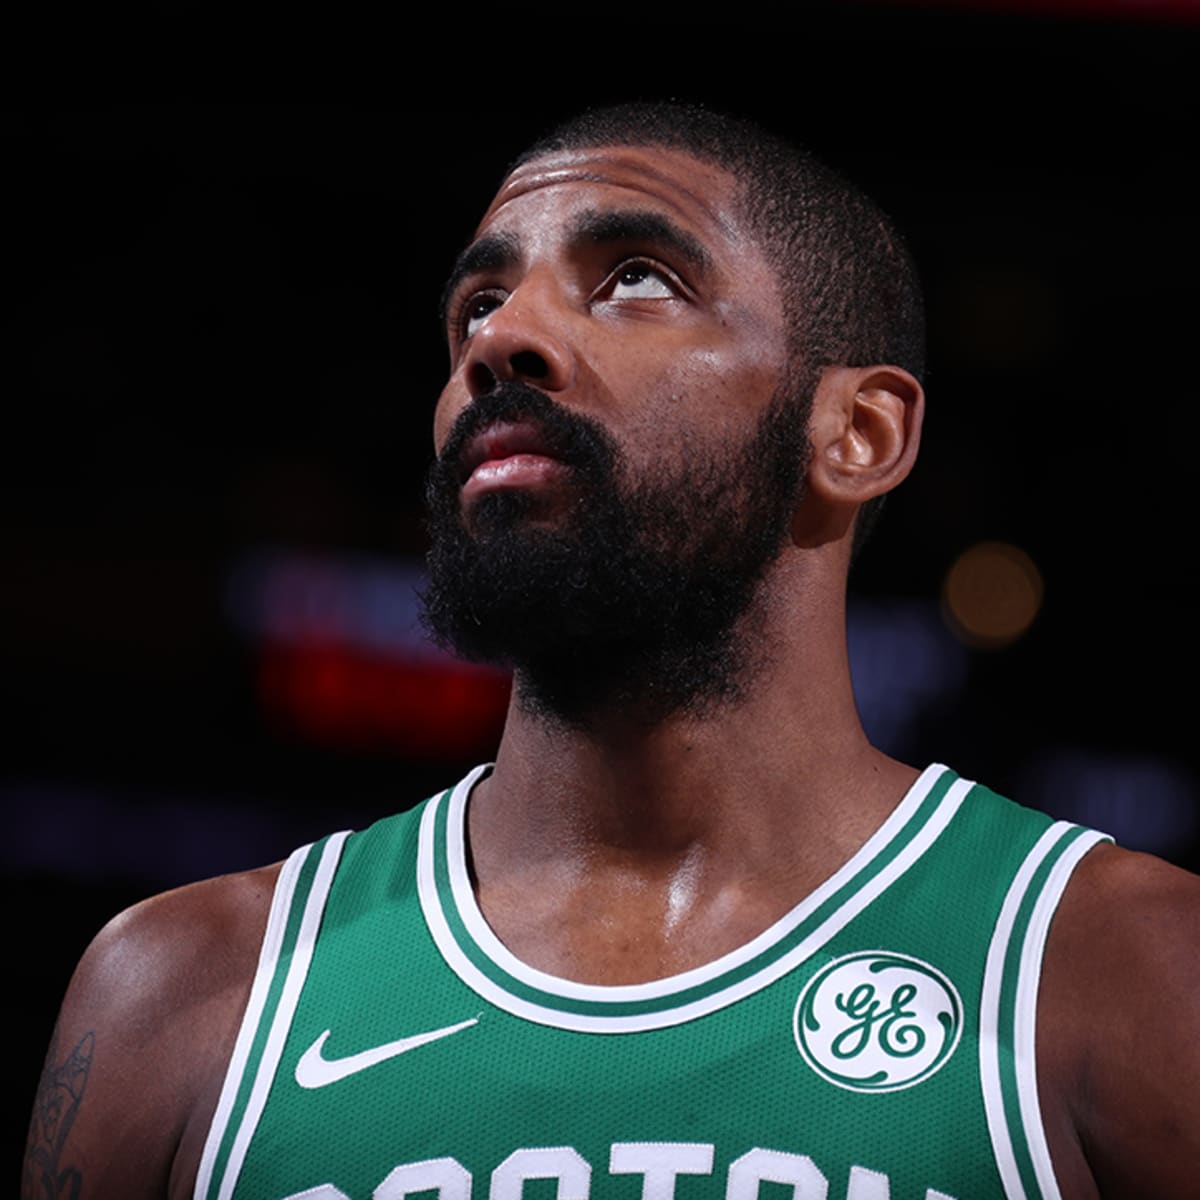 Watch: Kyrie Irving gives his thoughts on Christmas - Sports